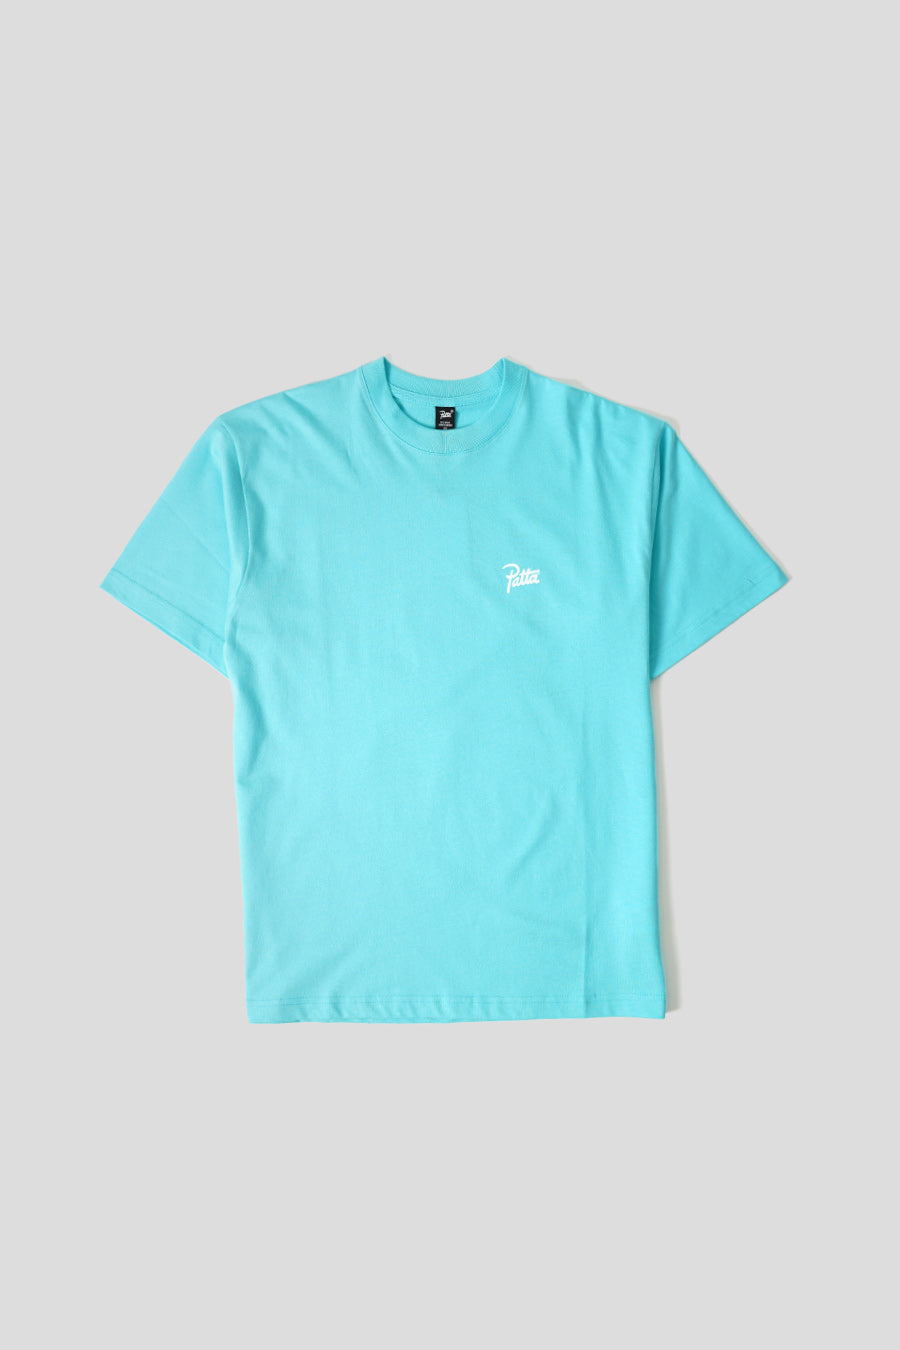 Patta - BLUE RADIANCE SOME LIKE IS HOT T-SHIRT  - LE LABO STORE